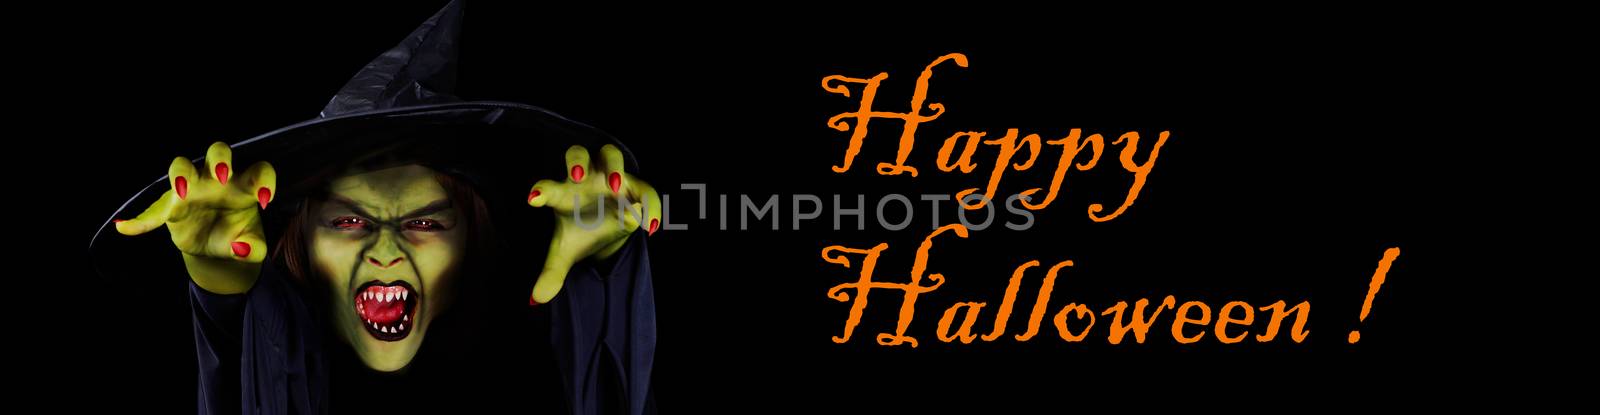 Scary green witch banner by Mirage3